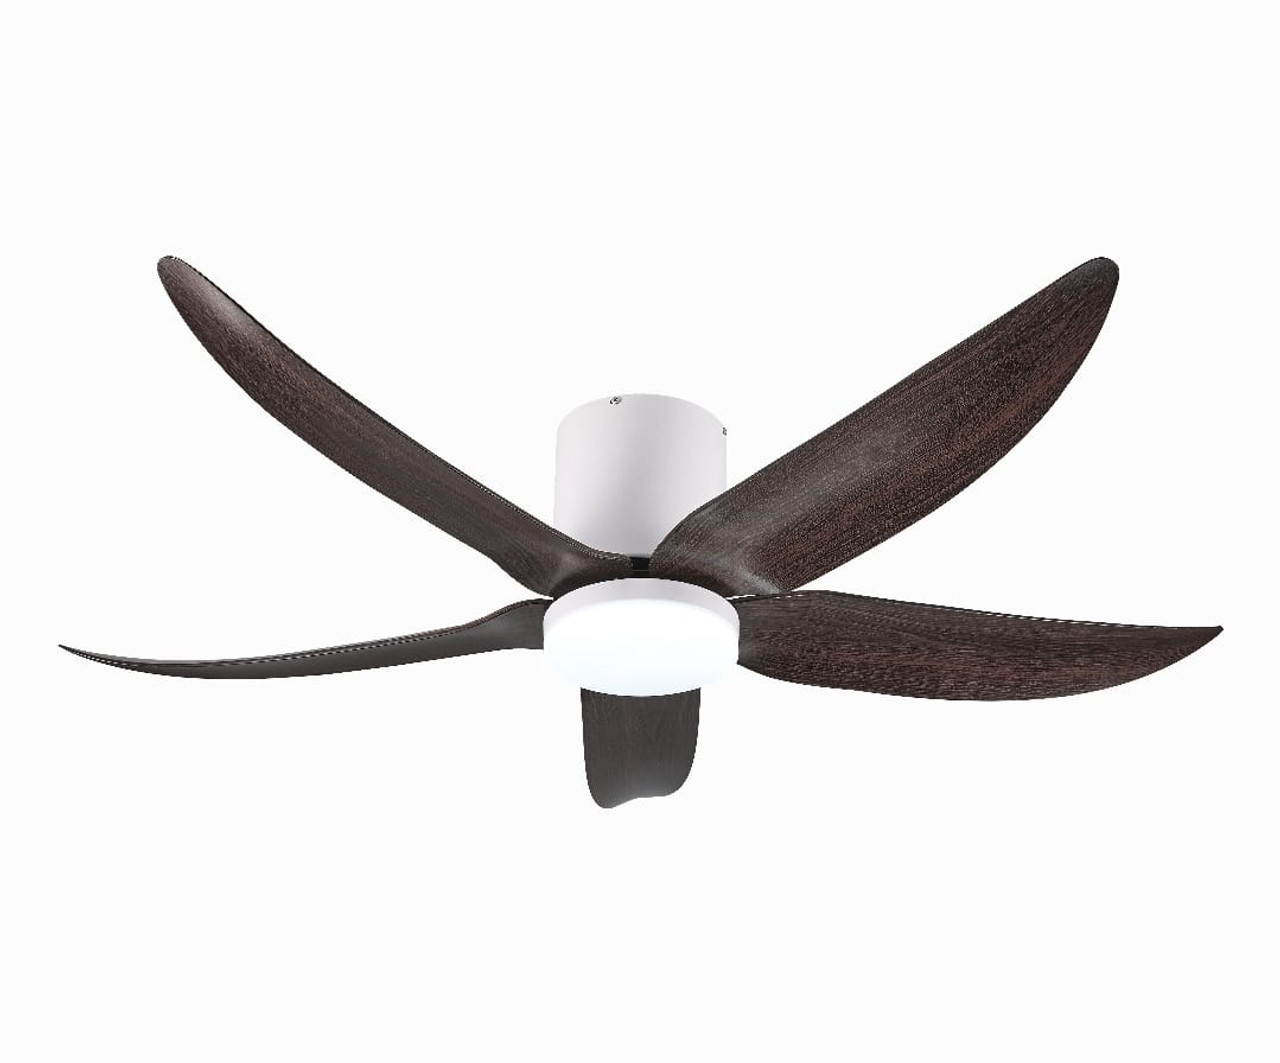 Modern ceiling fan in Singapore: Where functionality and aesthetic meet